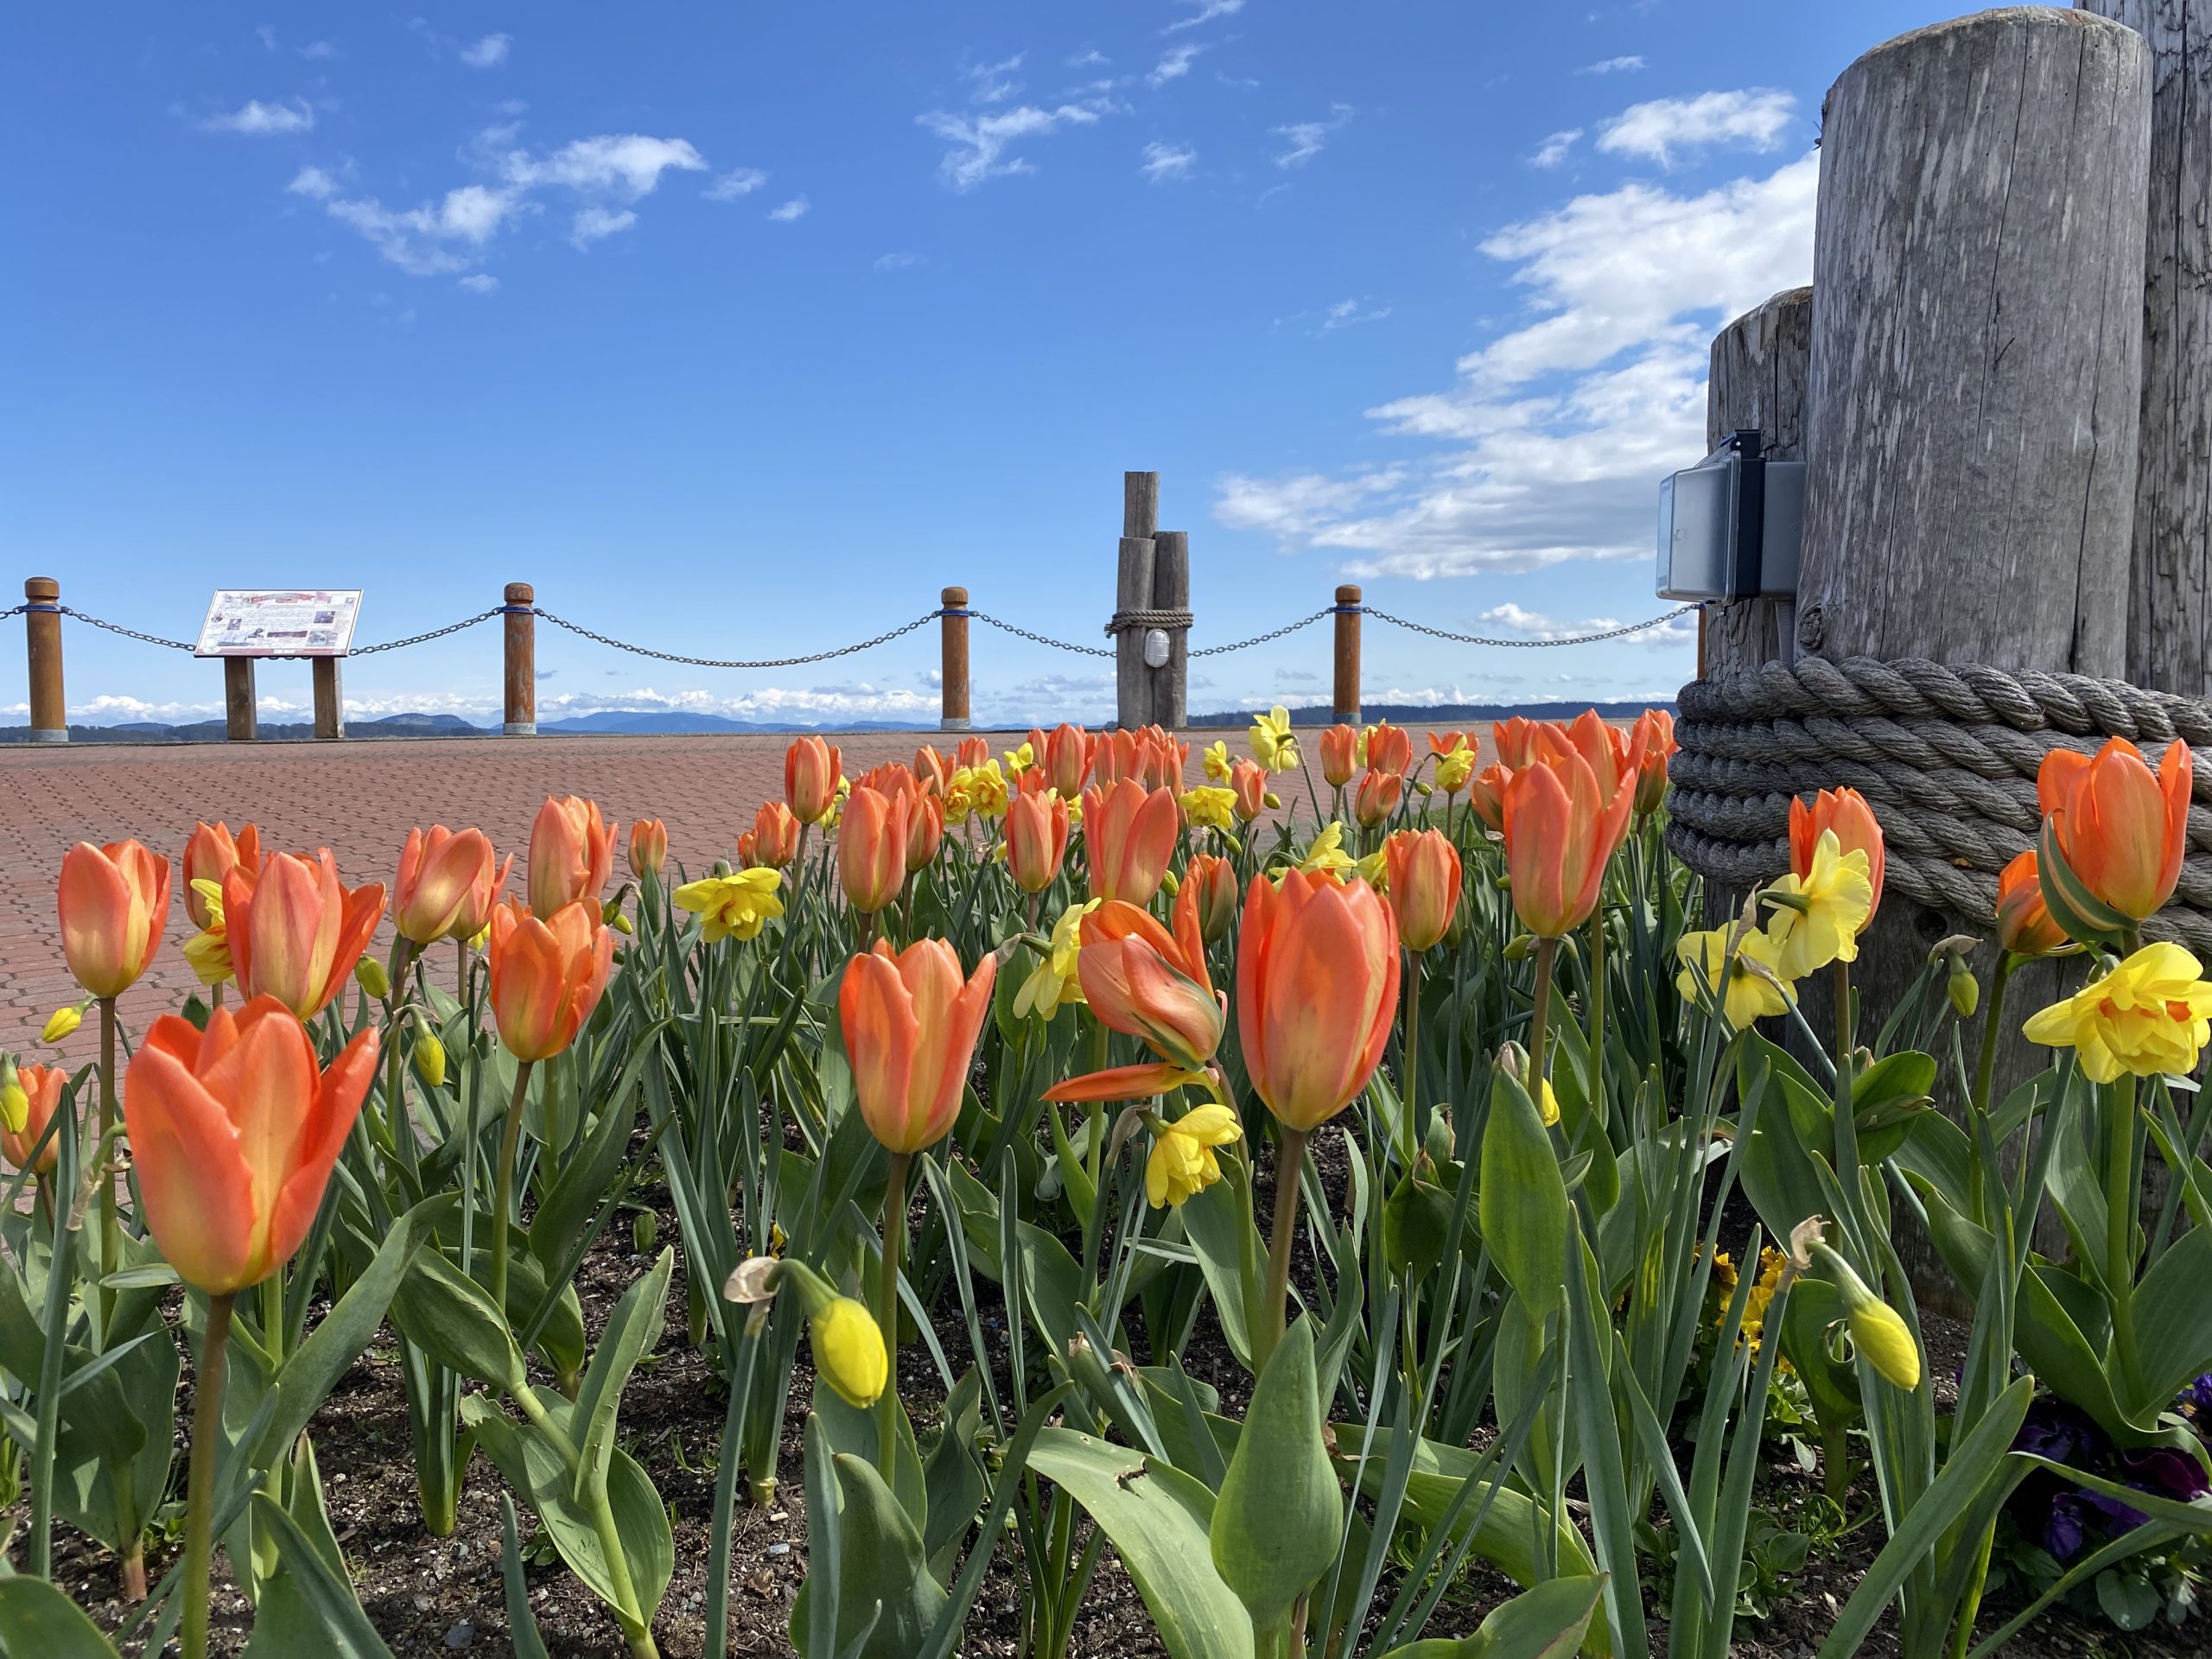  Waterfront Tulips in Seaport Park 